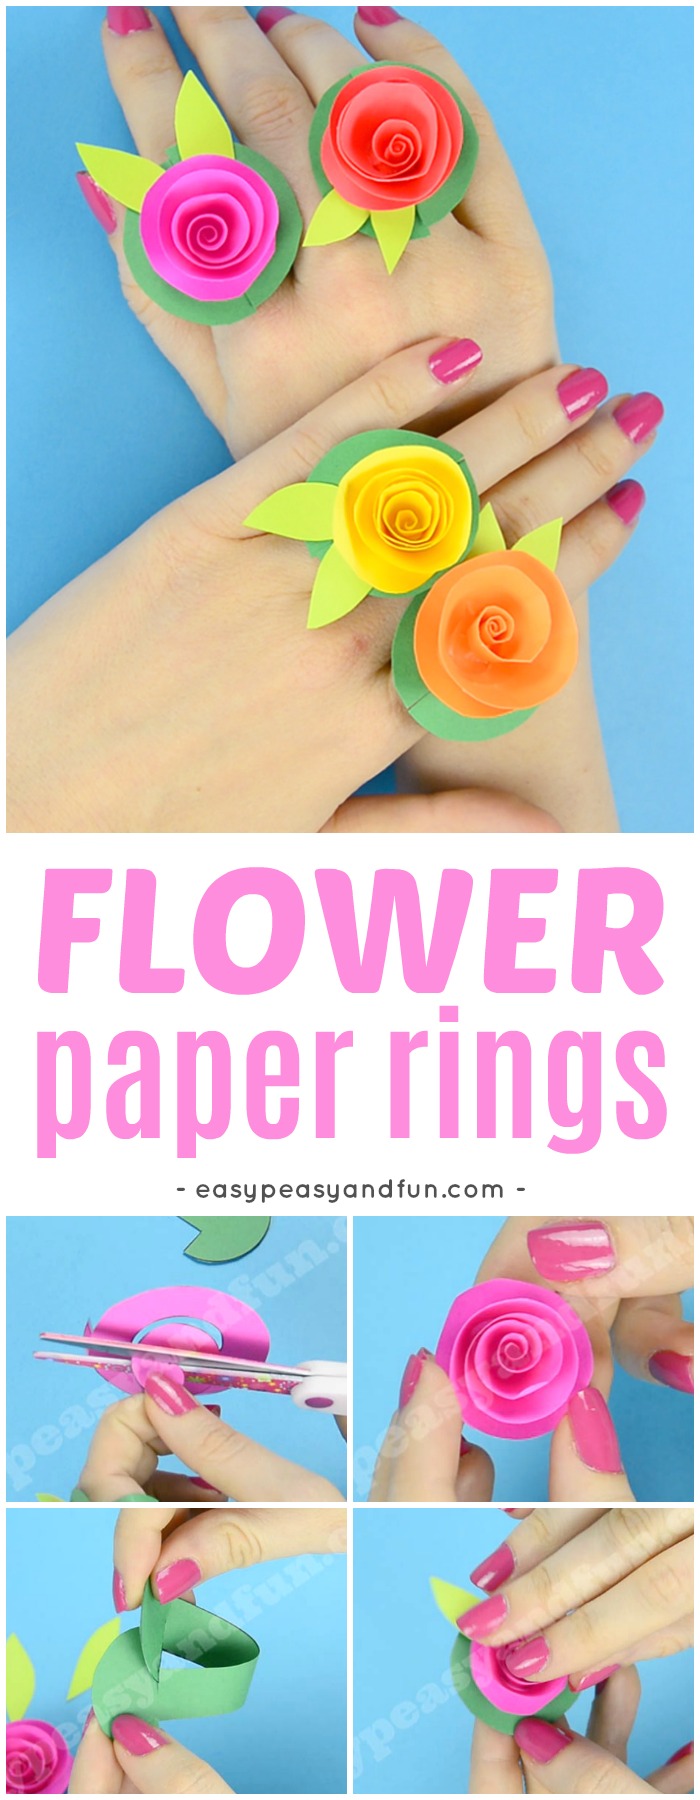 Beautiful Flower Paper Rings Spring Craft for Kids with Printable Template #flowercrafts #Springcrafts #papercrafts